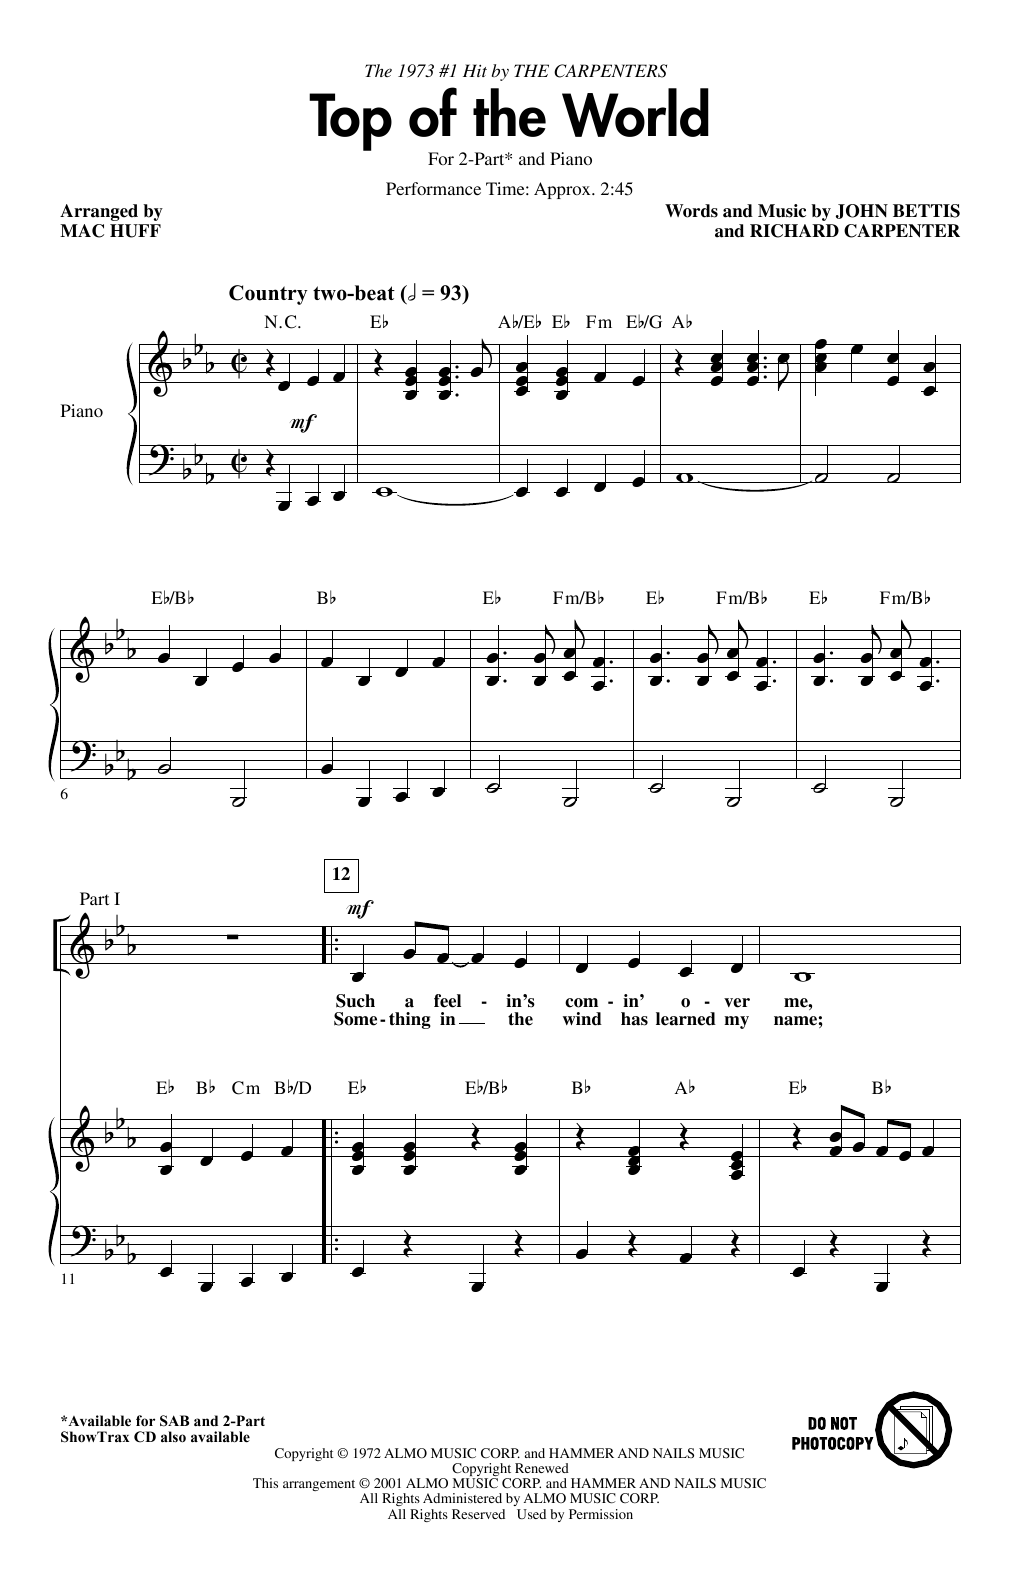 Download Carpenters Top Of The World (arr. Mac Huff) Sheet Music